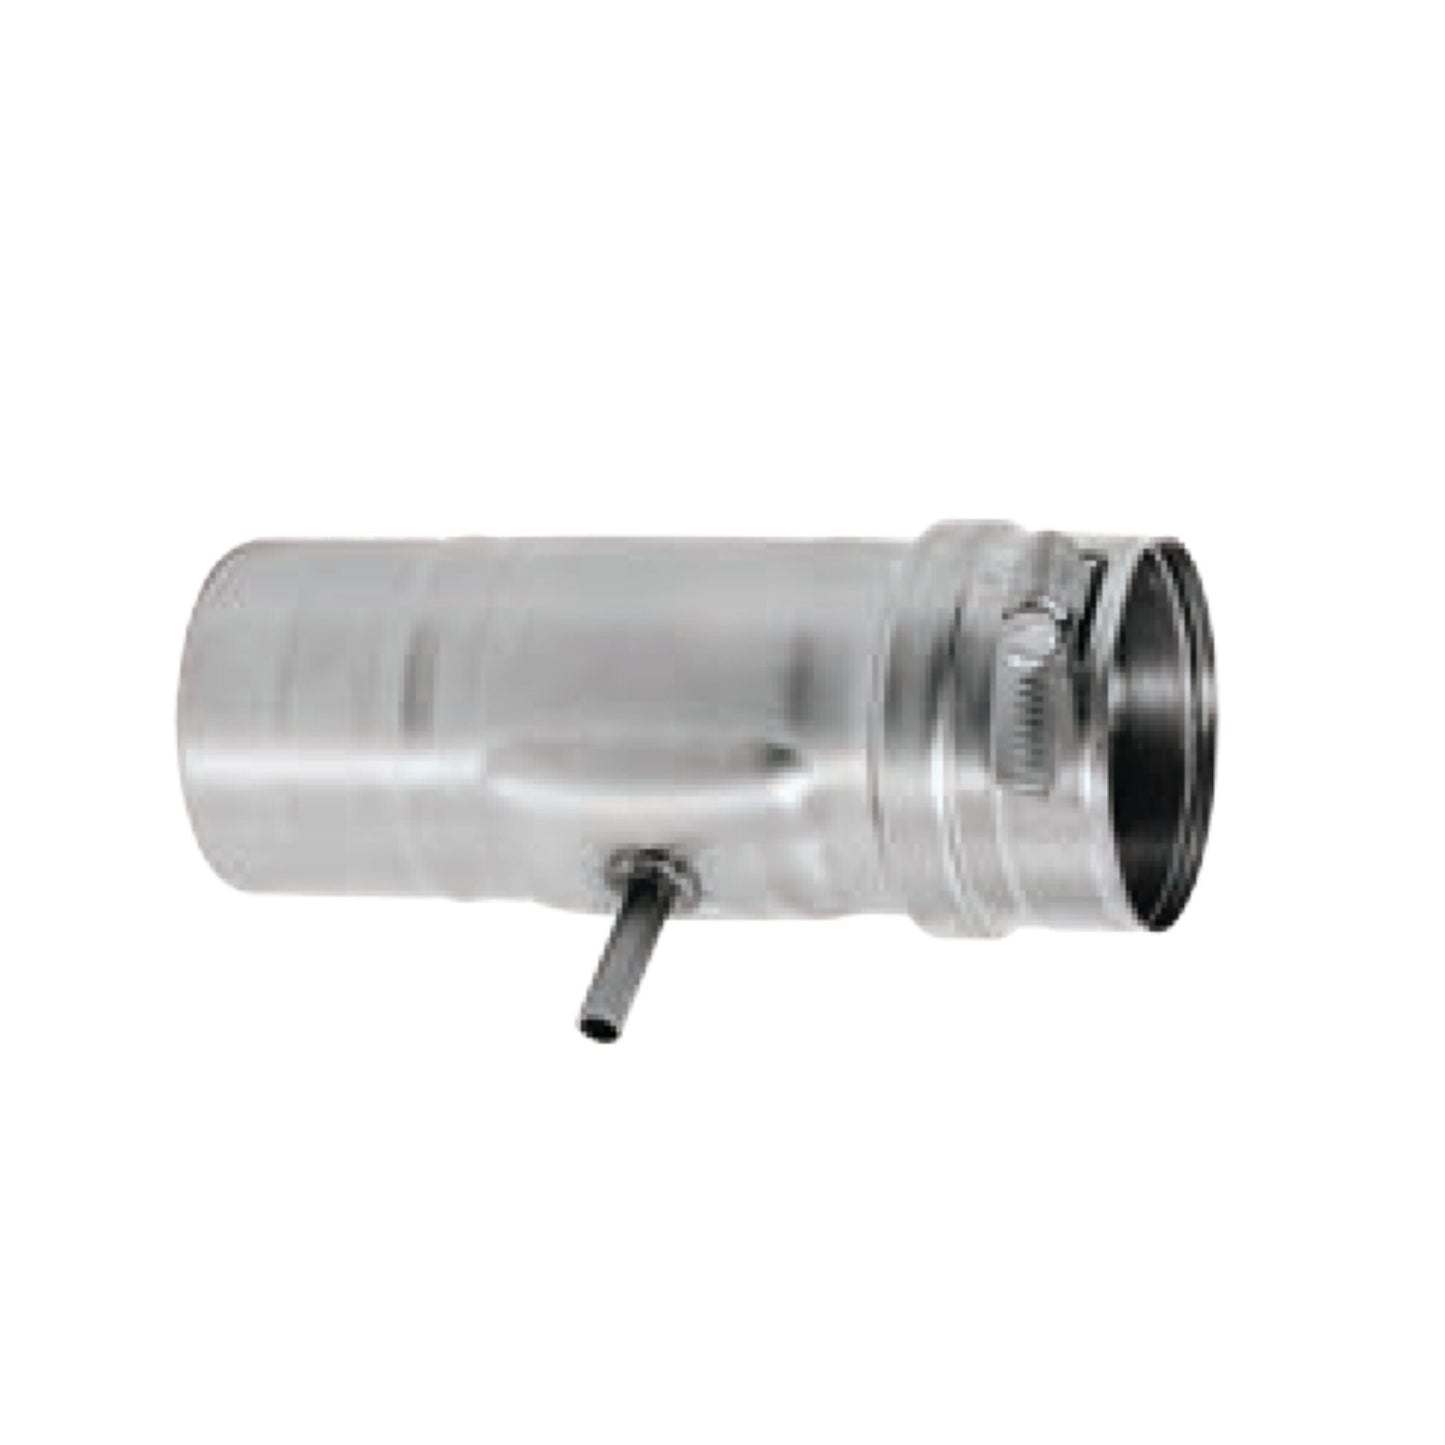 DuraVent FasNSeal 4" 316L Stainless Steel Horizontal Drip Tee